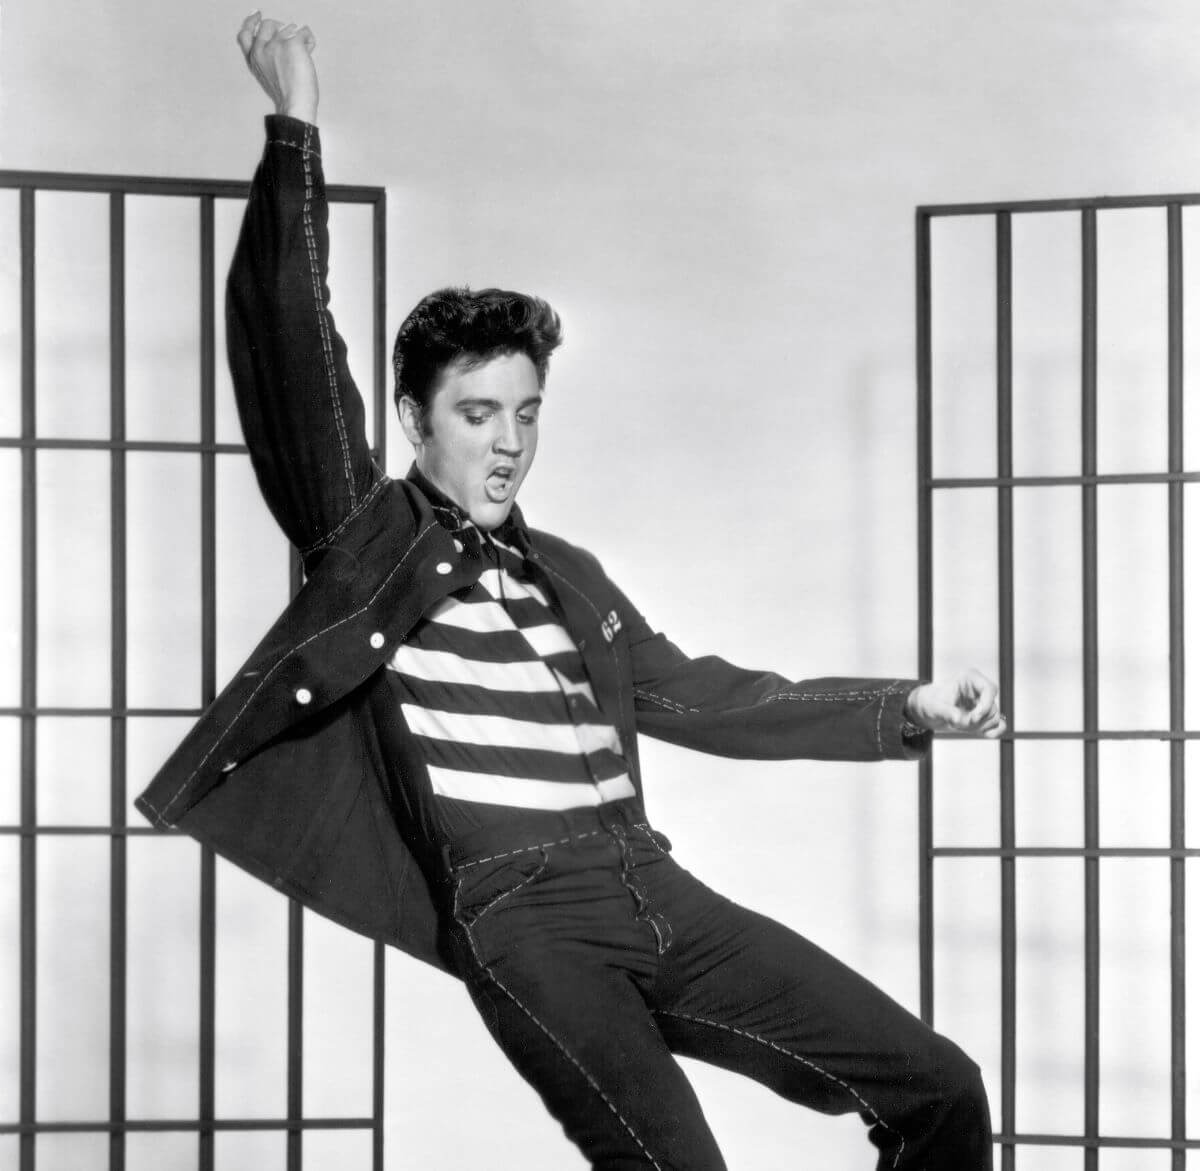 A black and white picture of Elvis wearing a striped shirt and dancing. He lifts one arm above his head.